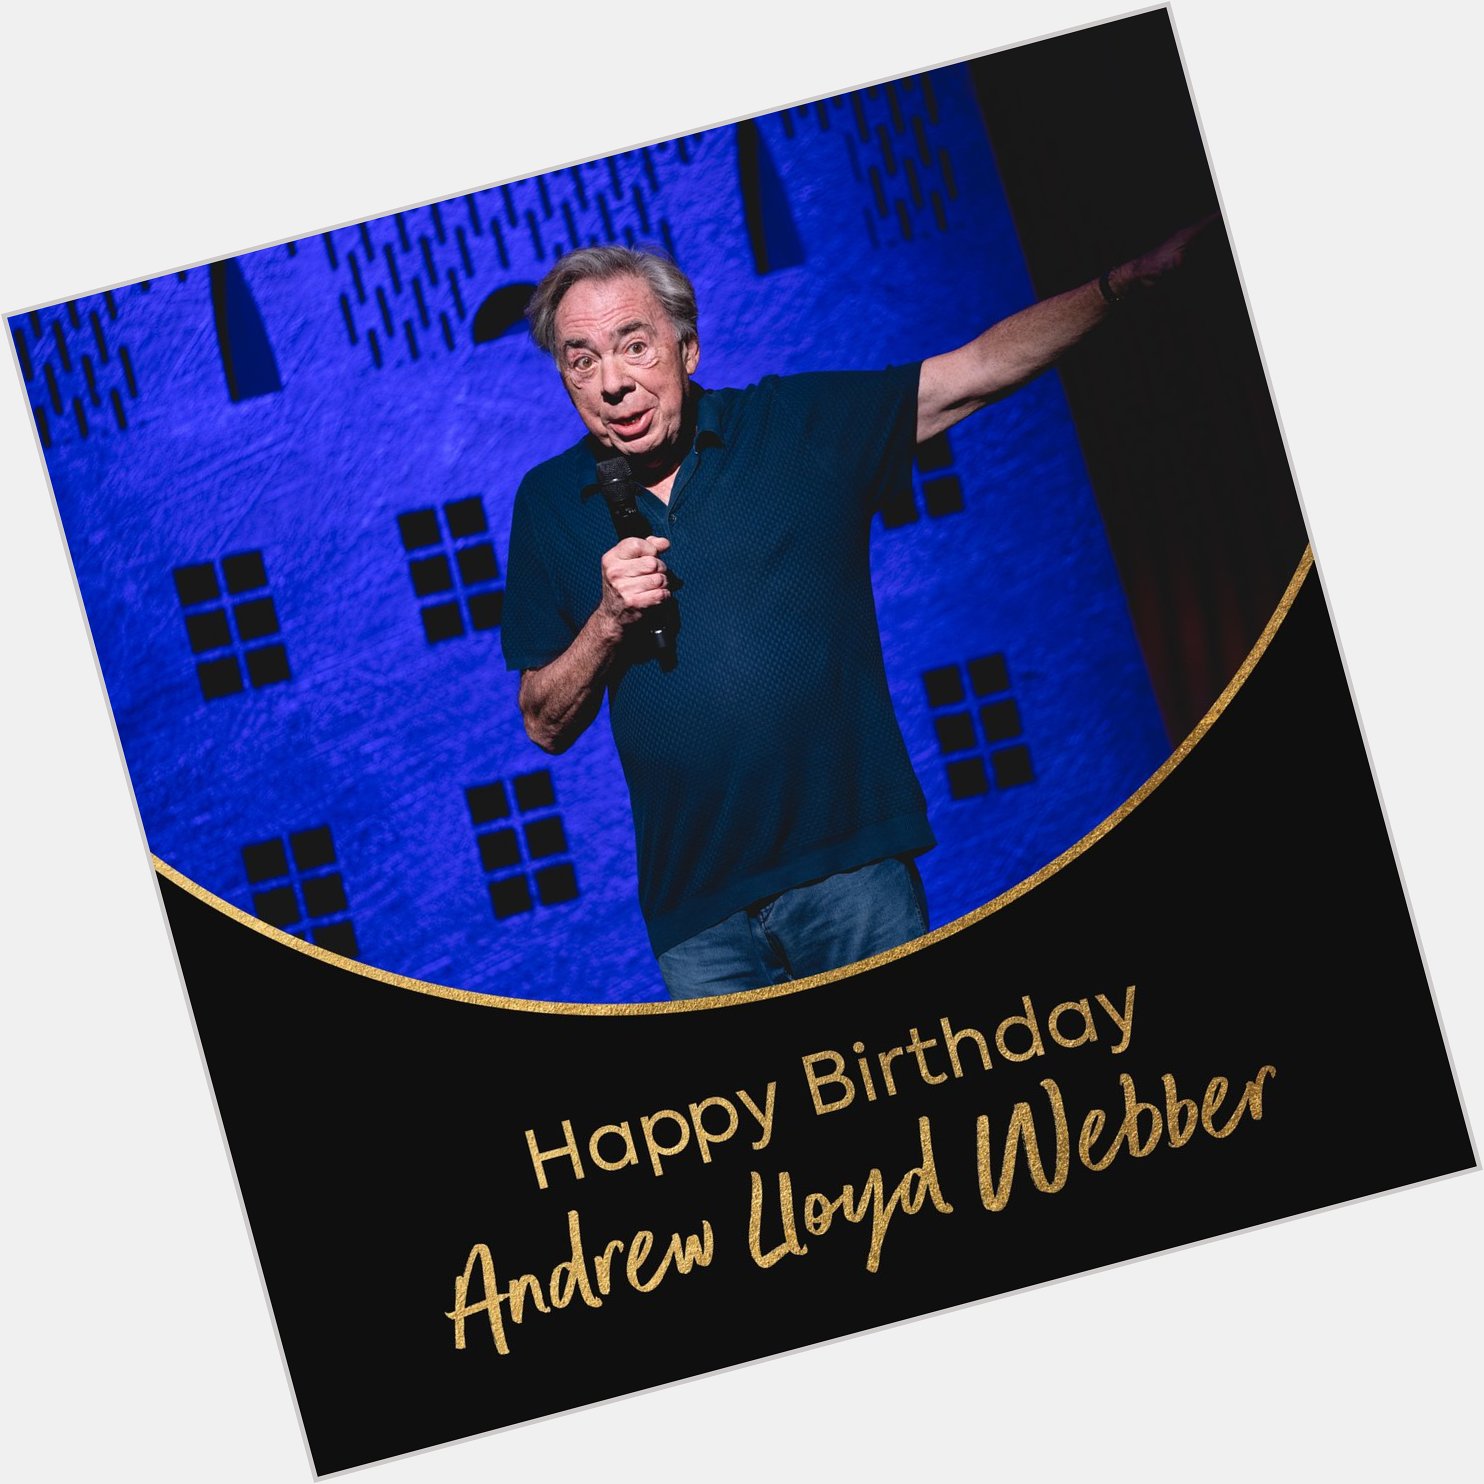 Wishing a very happy birthday to Andrew Lloyd Webber ( from everyone at LW Theatres! 